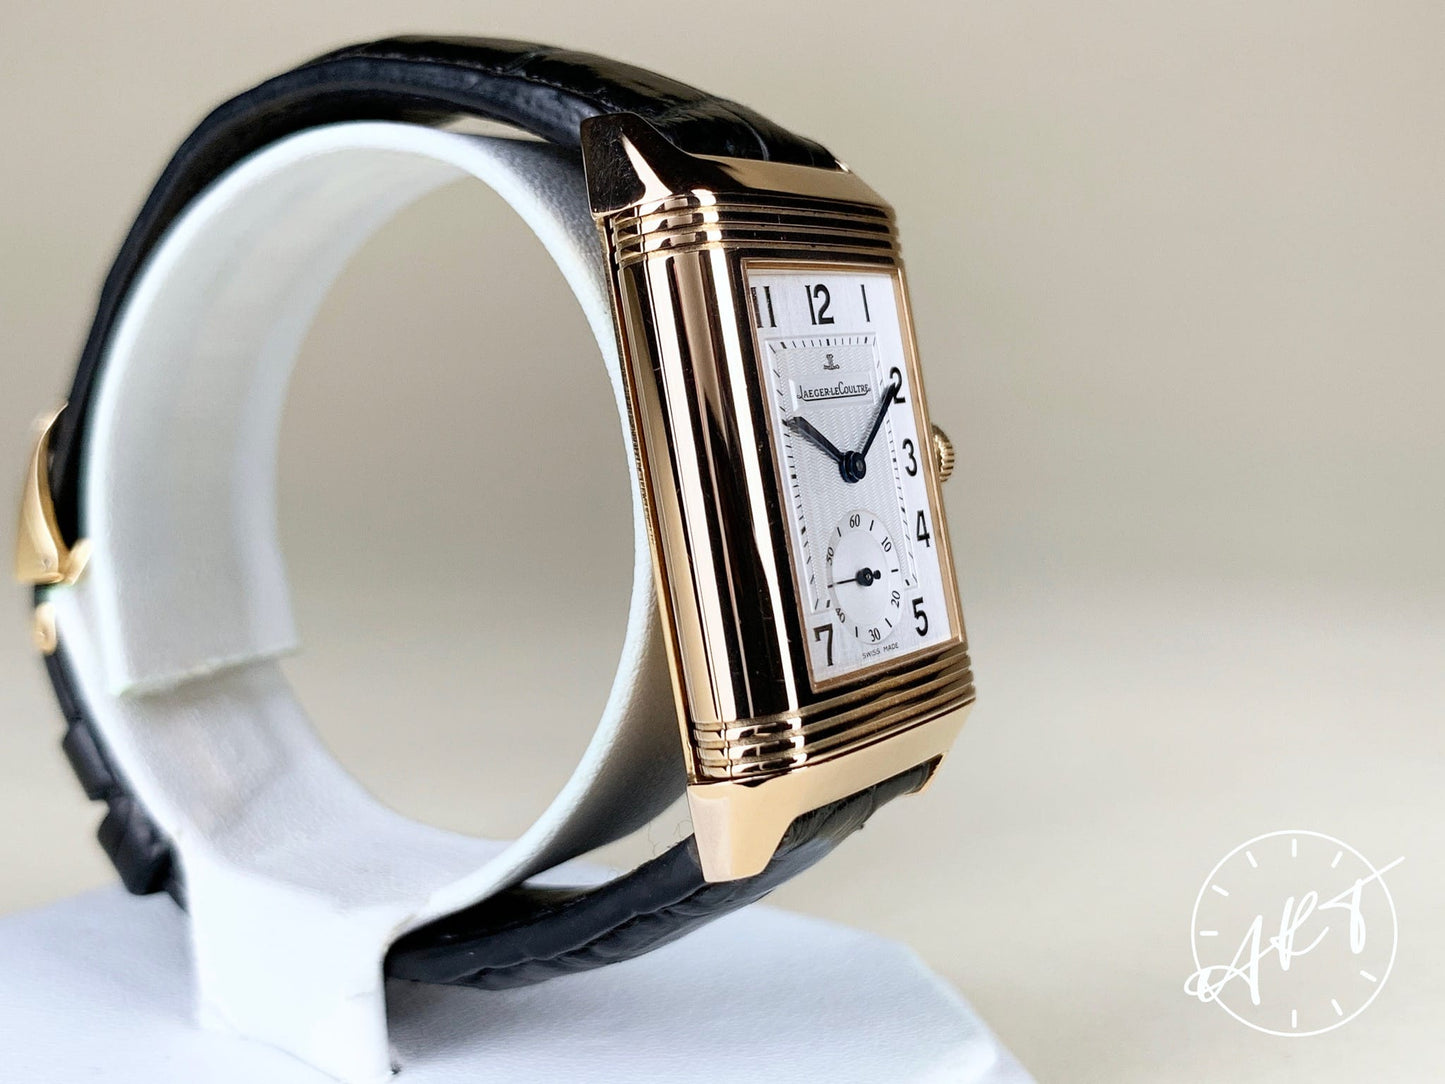 Jaeger-LeCoultre Reverso Duo GMT Day/Night Black & Silver Dial 18K RG Watch Q2712410 BP